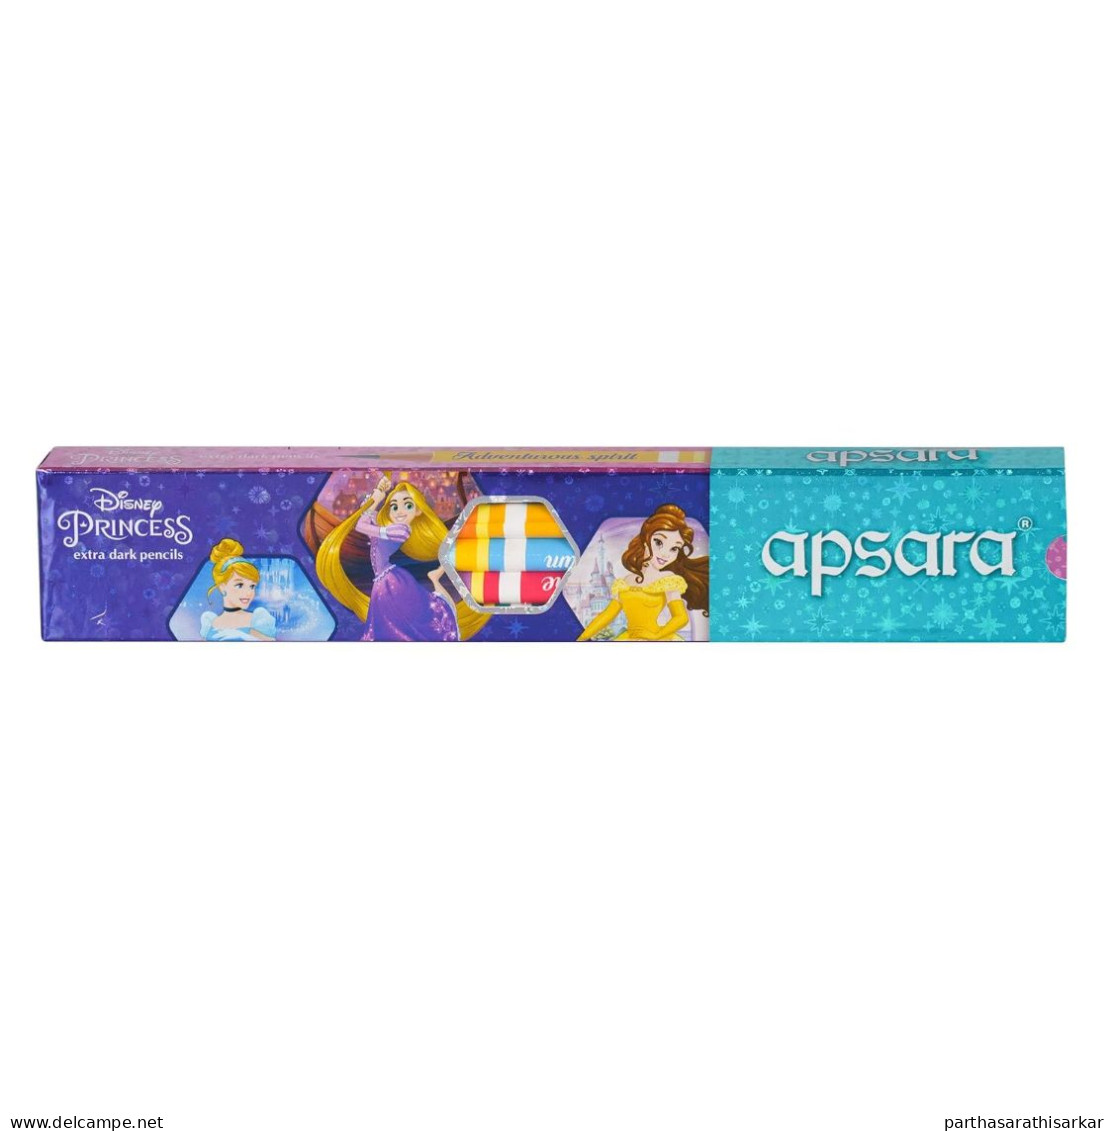 DISNEY PRINCESS PENCILS FROM INDIAN BRAND APSARA SET OF 5 PENCILS (2 SETS IN A PACK) - Stempel & Siegel